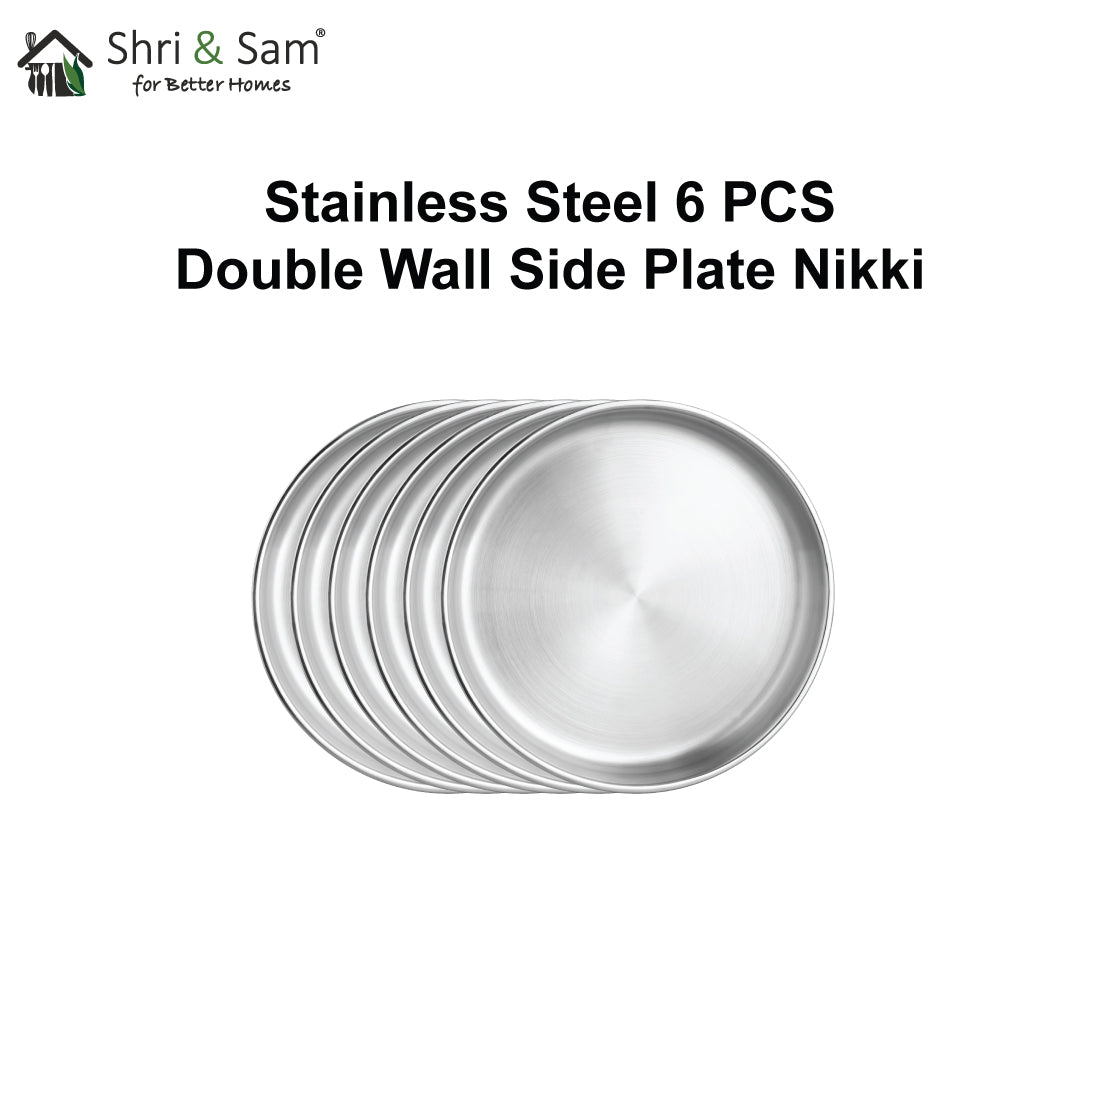 Stainless Steel 6 PCS Double Wall Side Plate Nikki